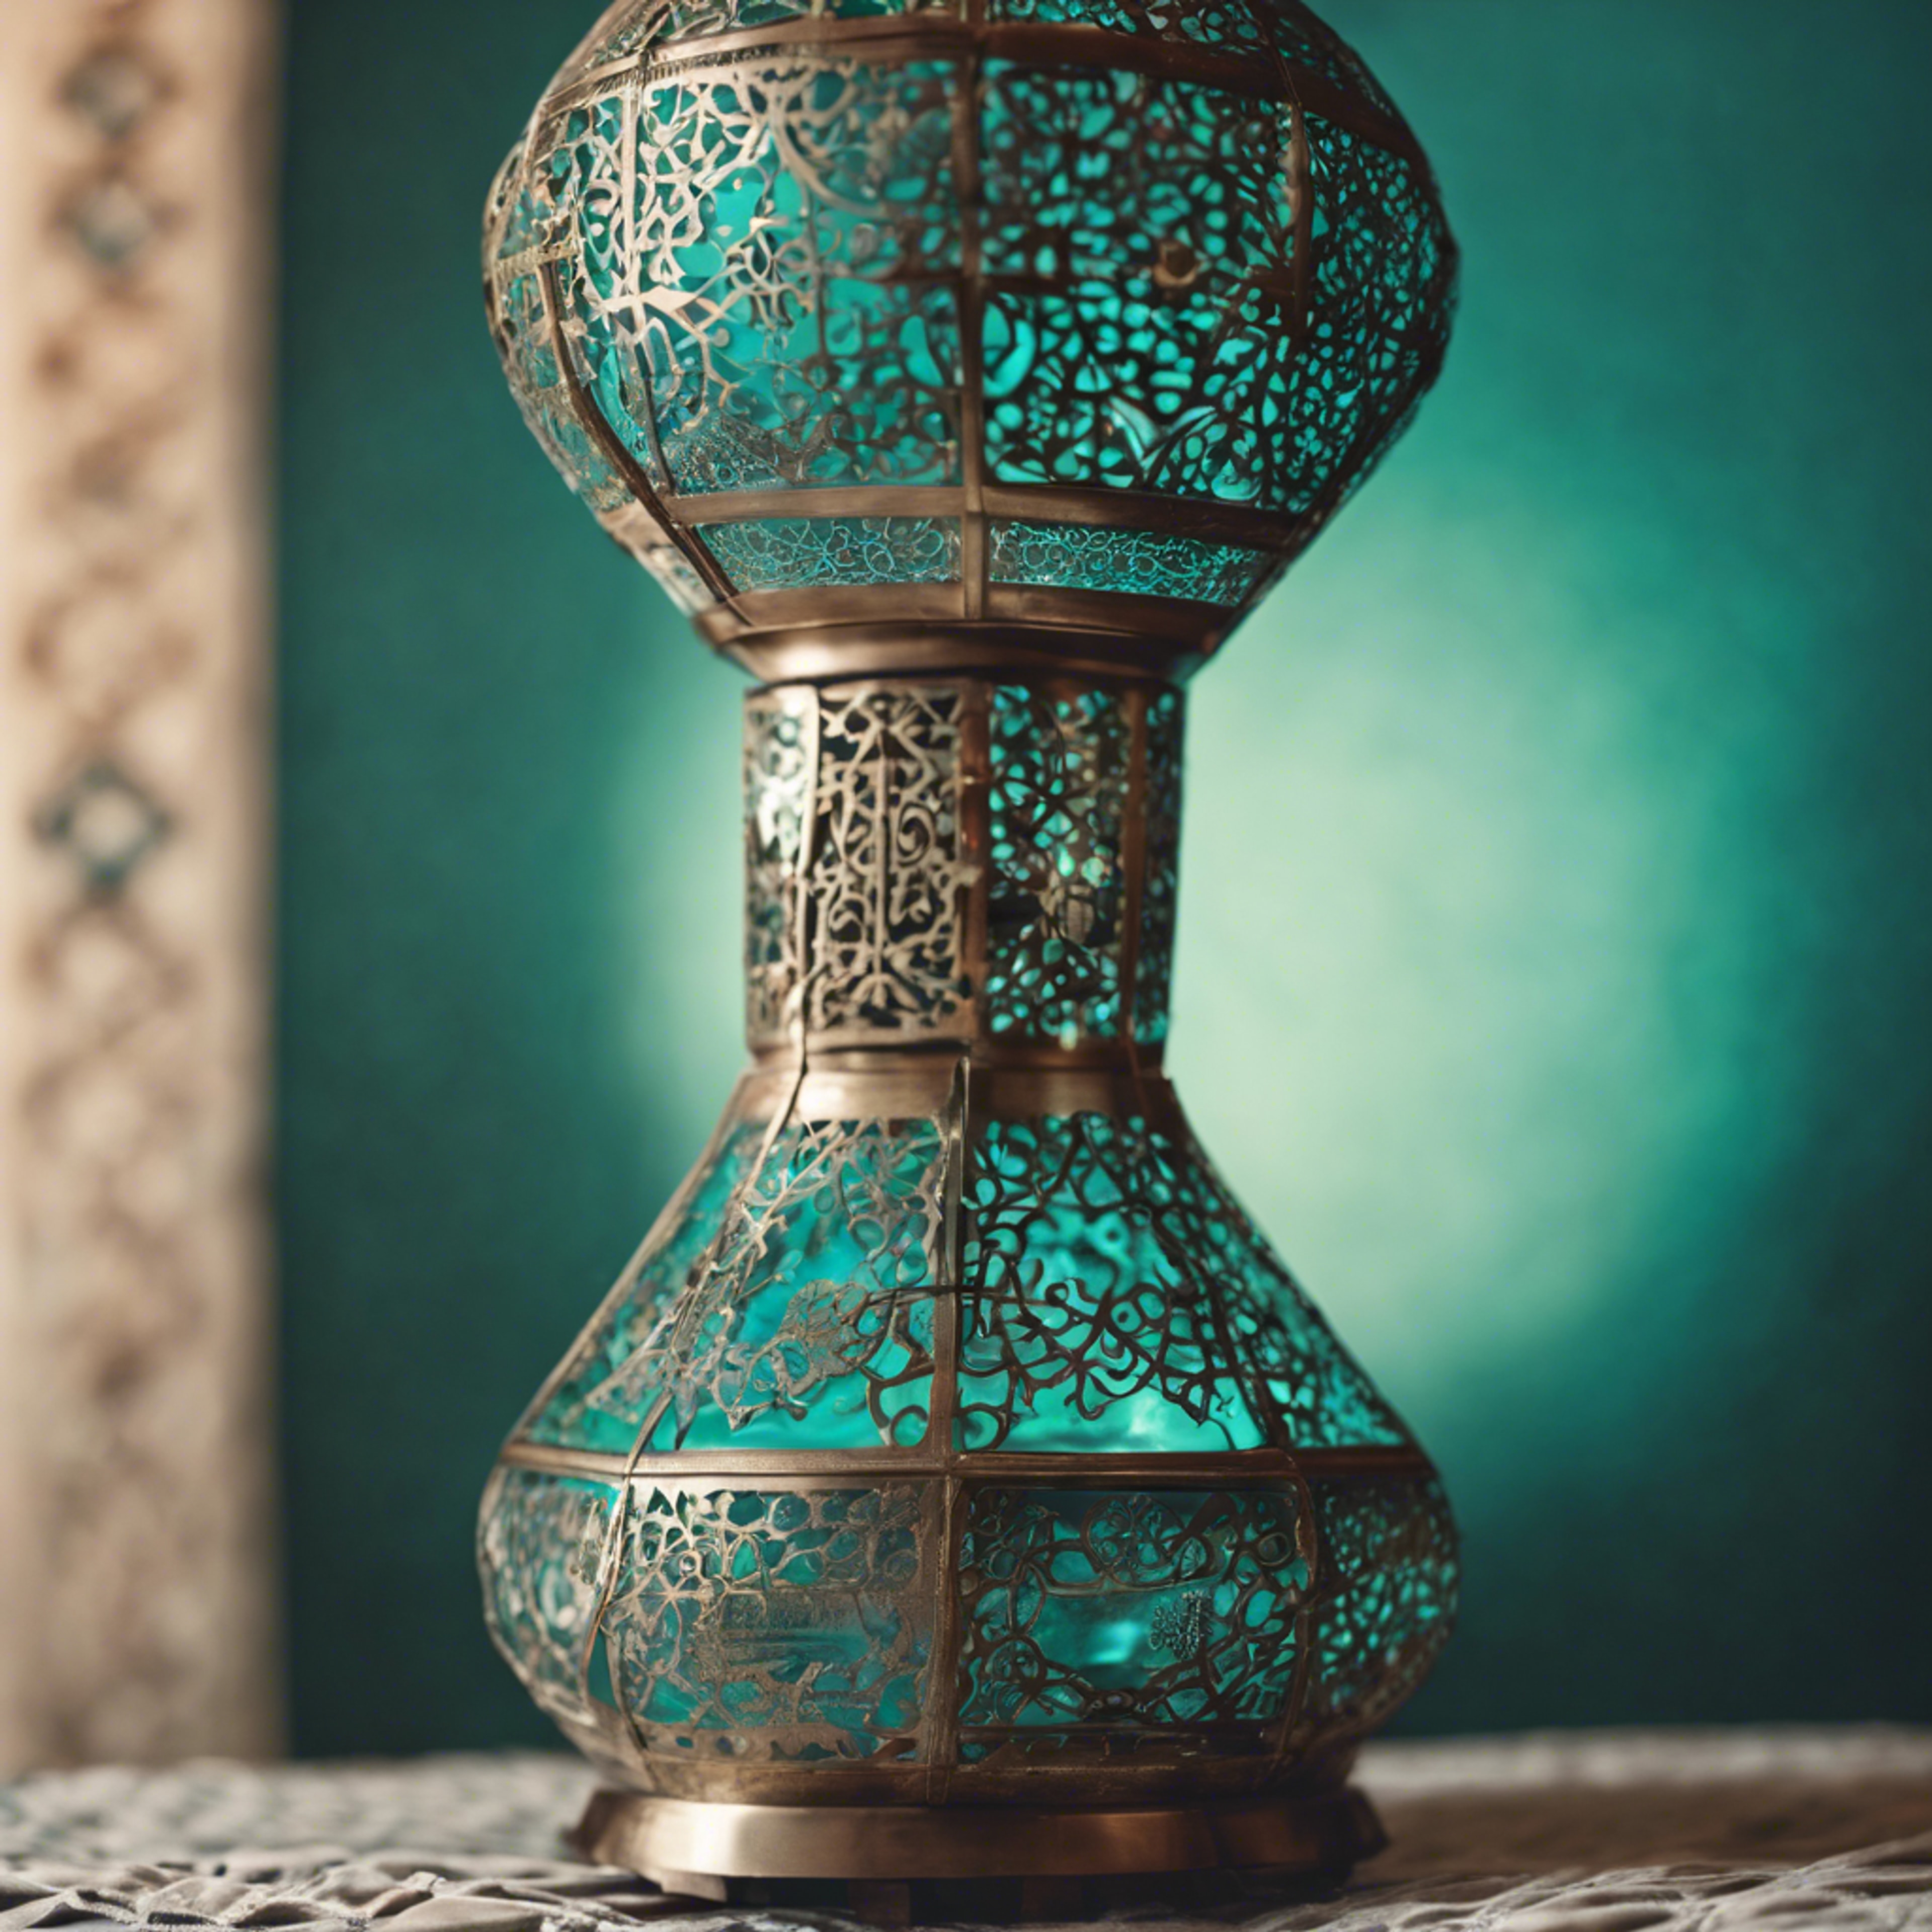 A traditional Moroccan lamp in a cool teal color. Ფონი[a27f0371dbce4744aca5]